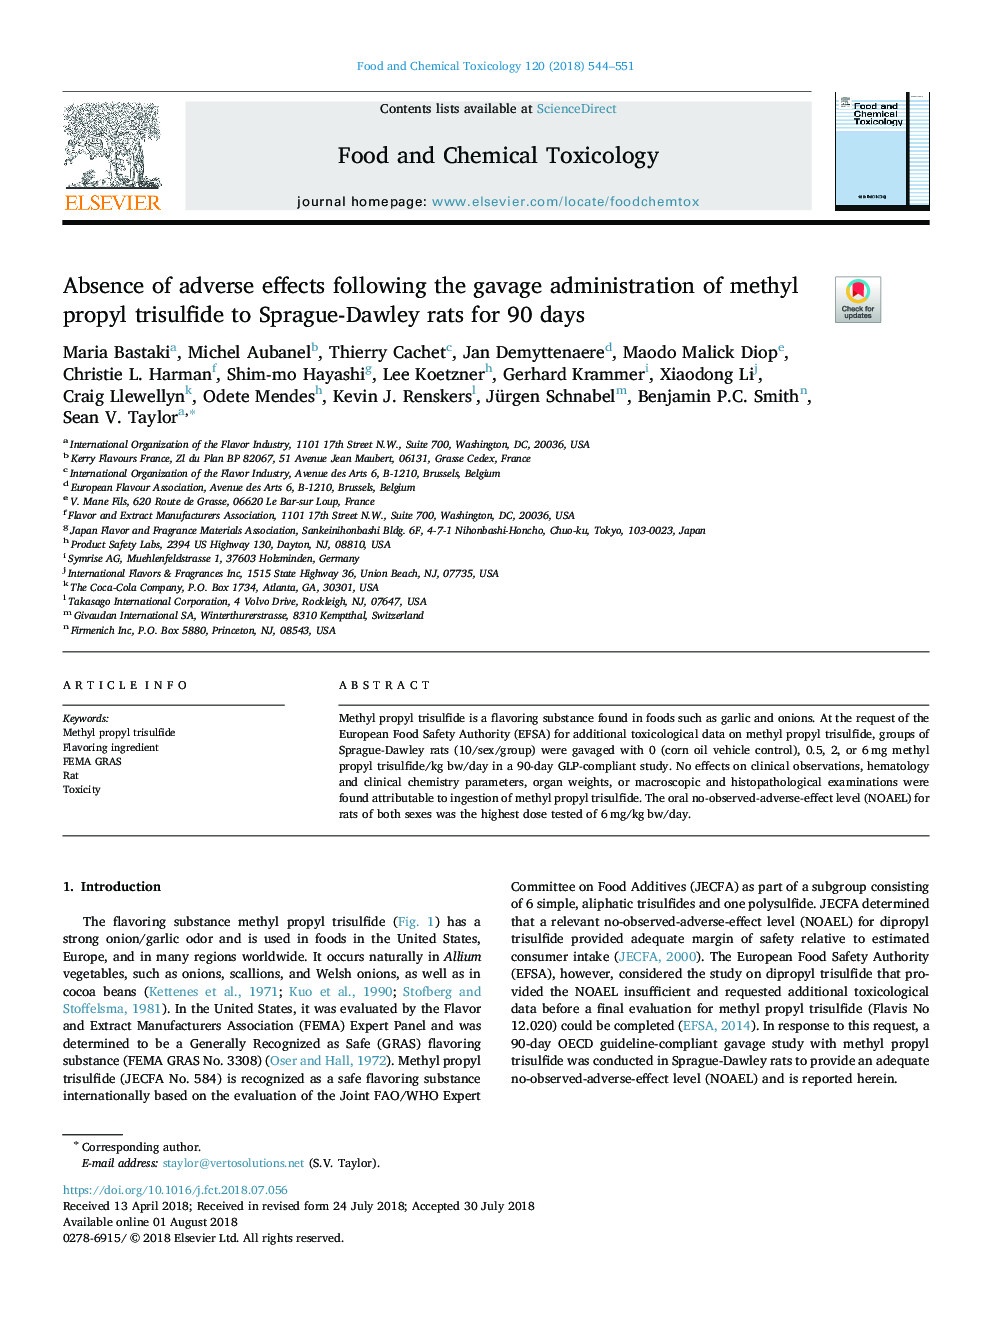 Absence of adverse effects following the gavage administration of methyl propyl trisulfide to Sprague-Dawley rats for 90 days